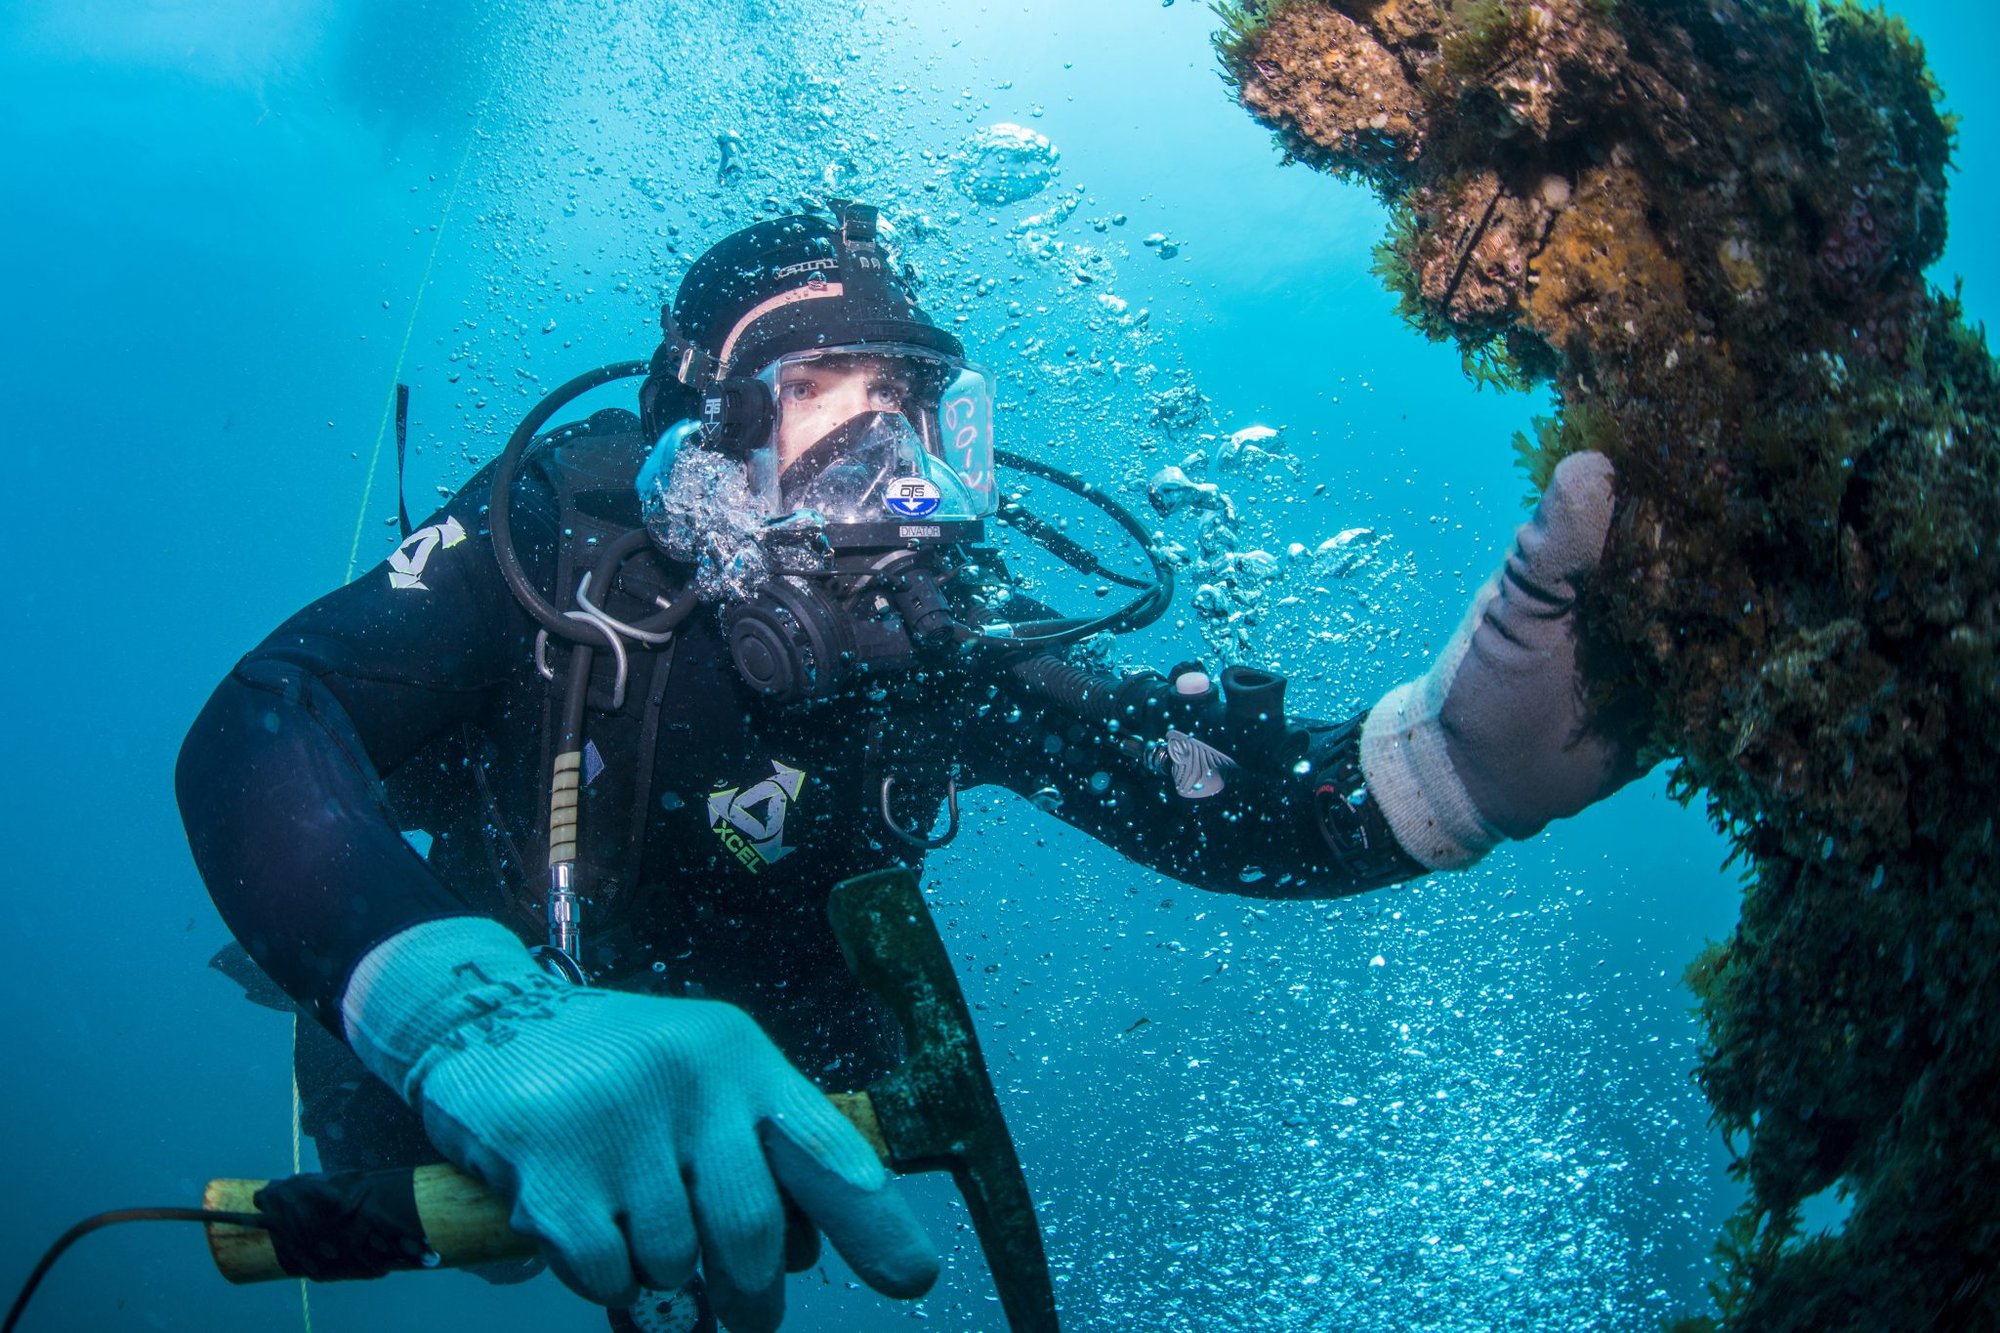 Petty Officer 2nd Class Matthew Bobinchak, an equipment operator assigned to an Underwater Construction Team, cleans growth off a buoy chain while participating in diver’s training off the coast of San Clemente Island, June 7, 2015.  US Navy photo by Mass Communication Specialist 2nd Class Daniel P. Rolston.